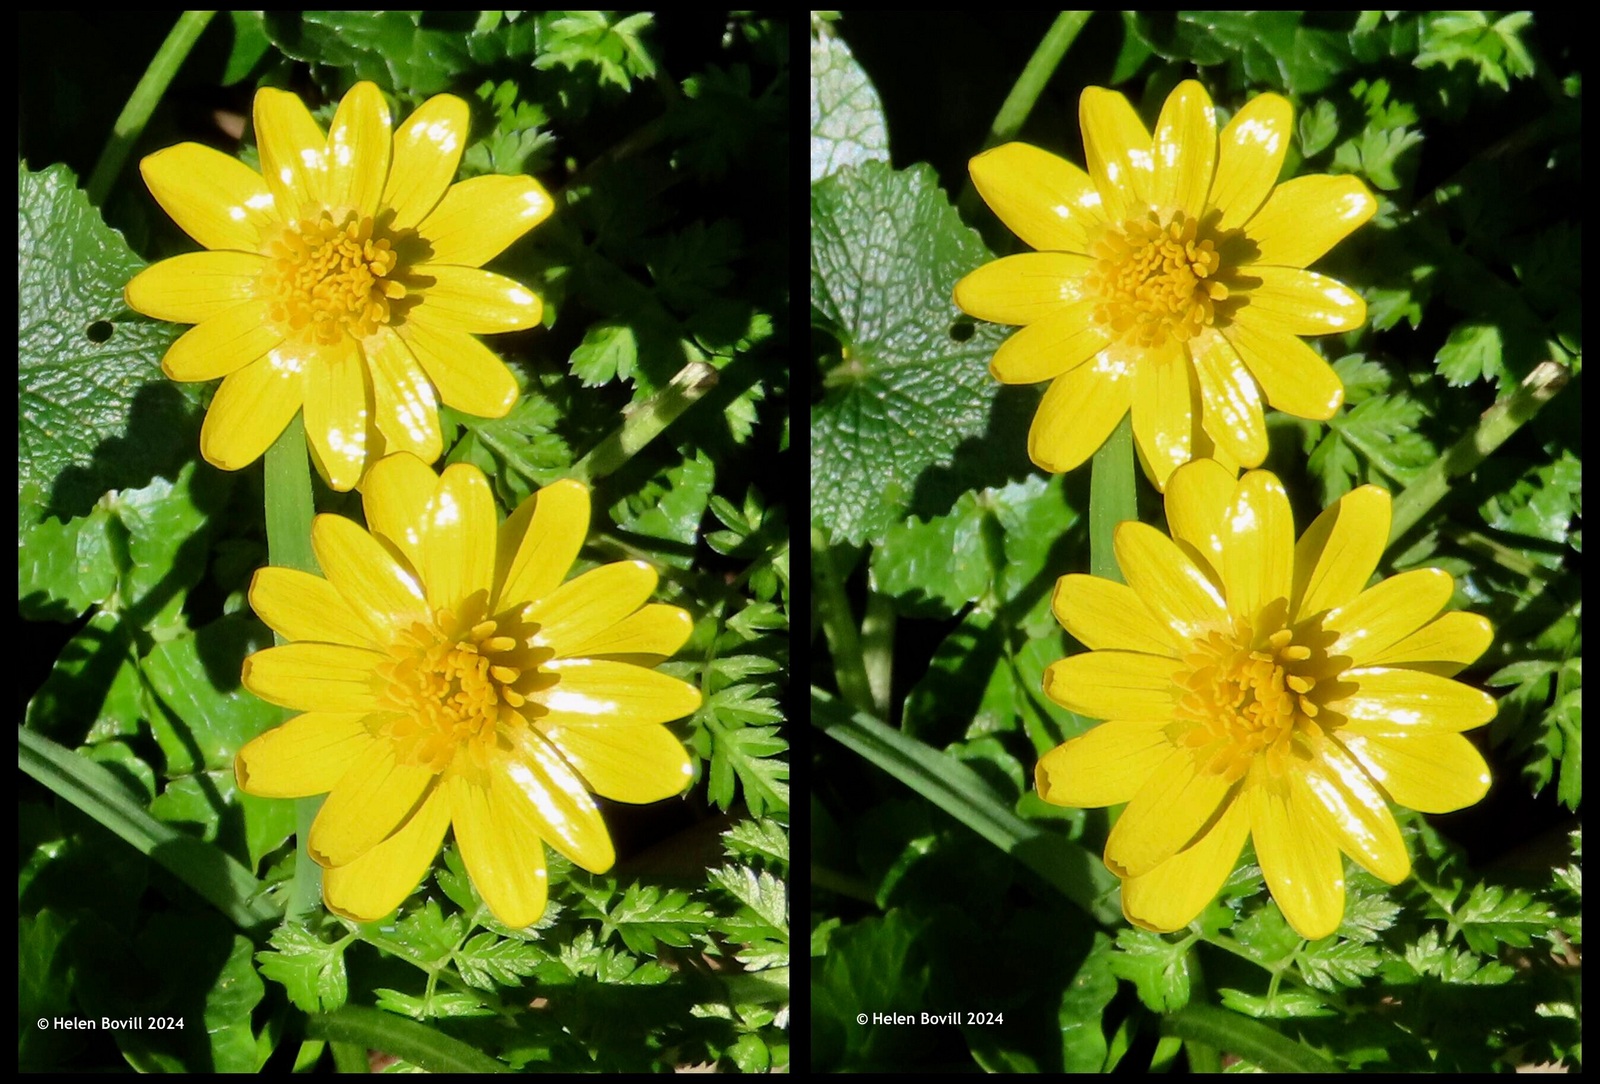 Two photos, each showing two bright yellow lesser celandine flowers